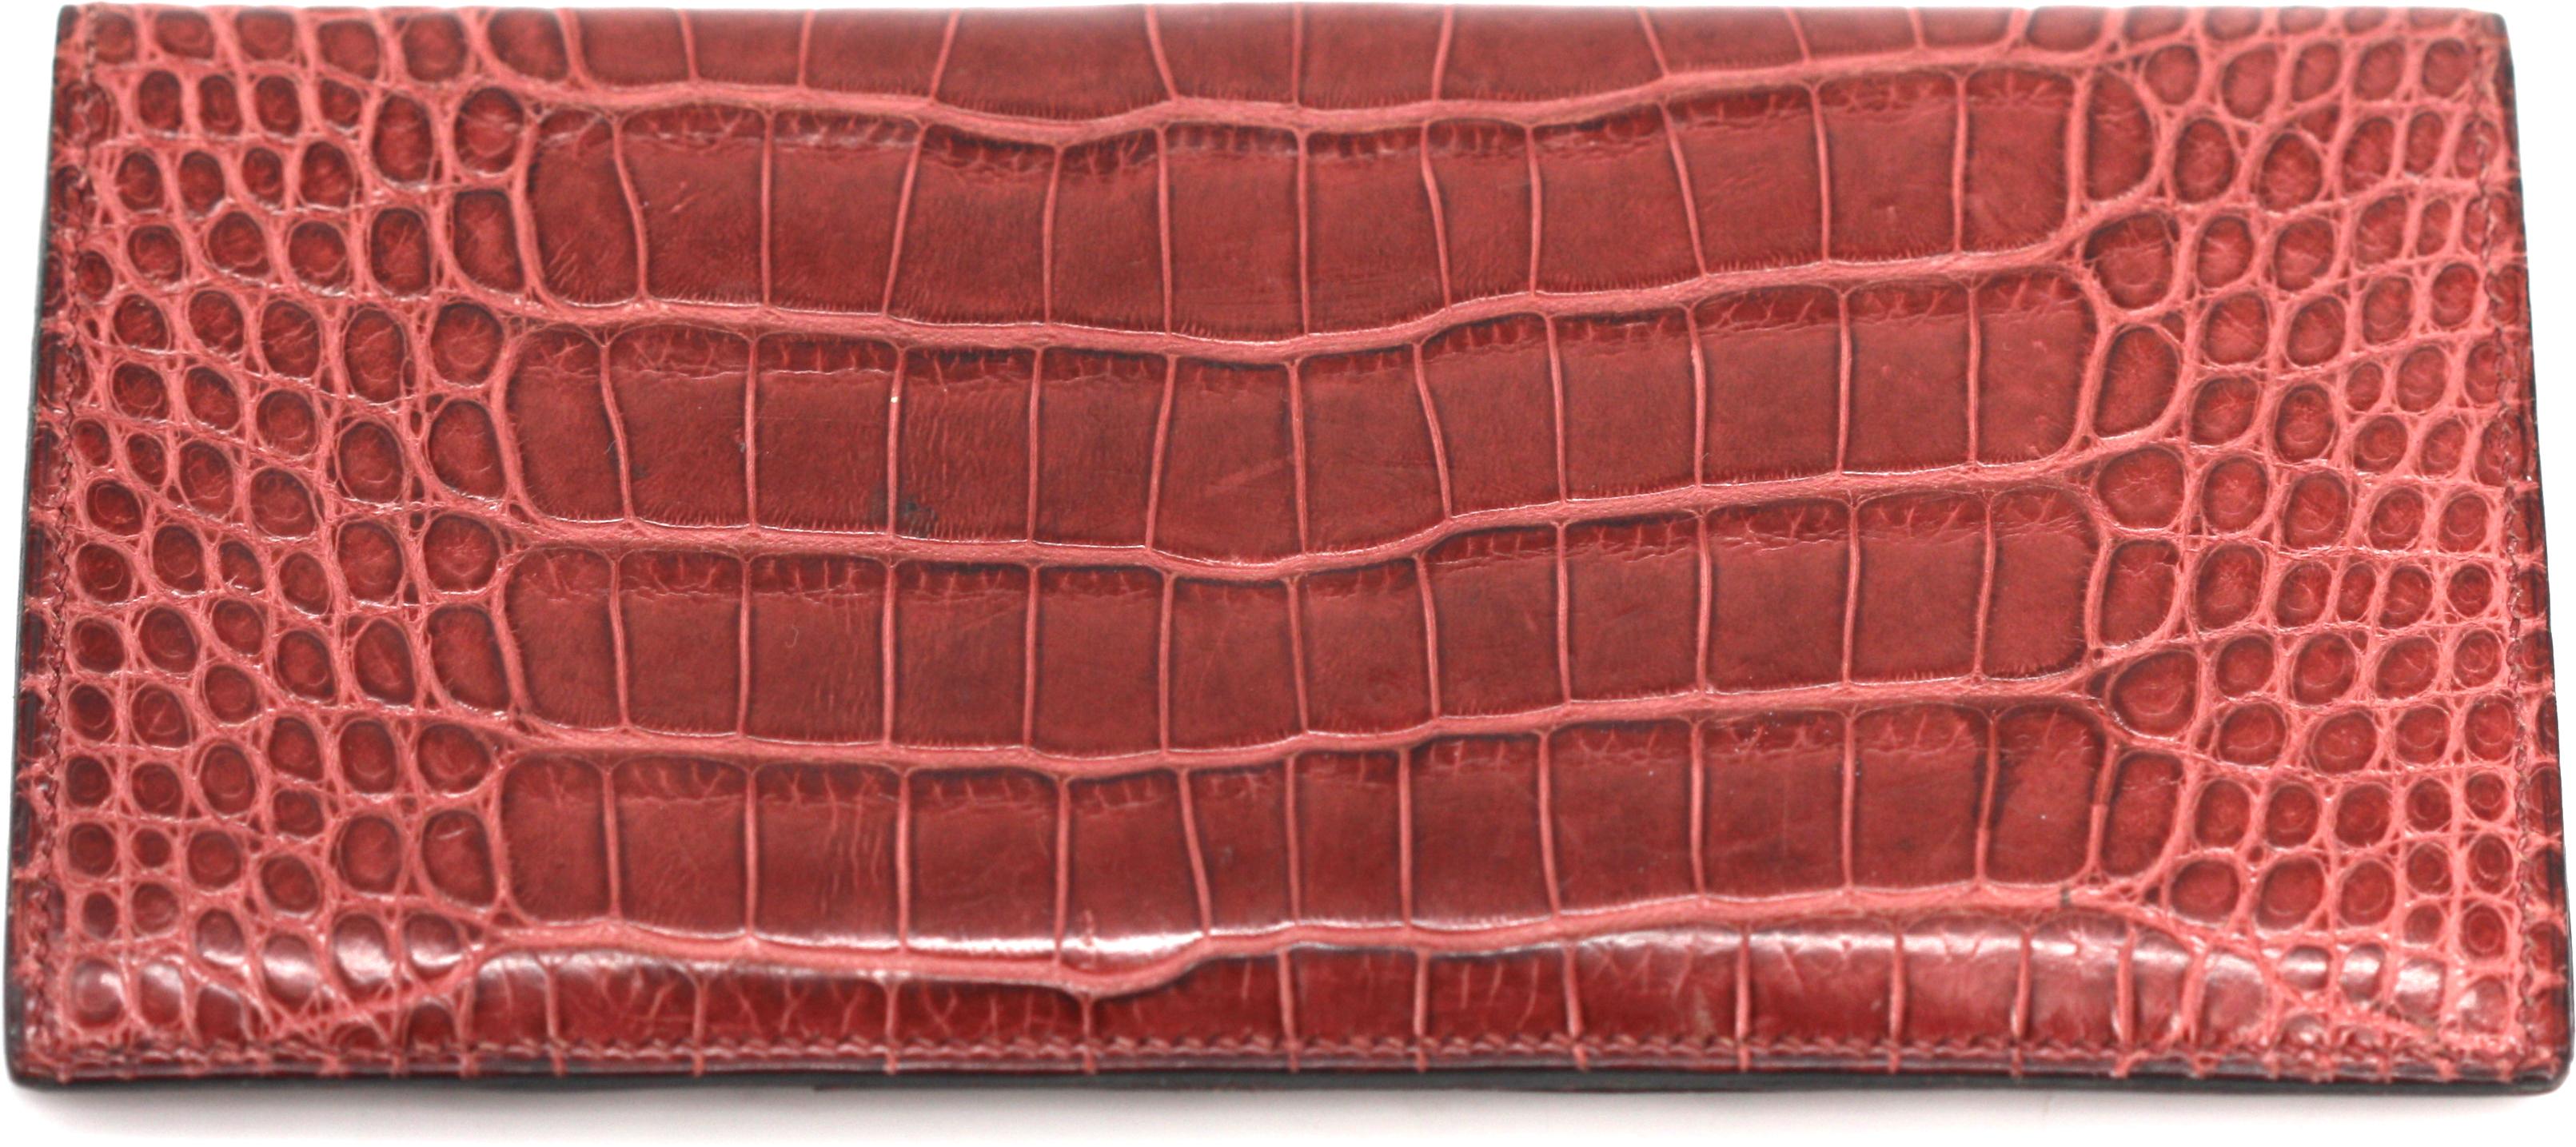 
Hermes Red Crocodile Leather Billfold
Marked on the inside. Rectangular, opening to multiple card and bill pockets, with box and ribbon, appears unused.
3.75 by 7 in.
Condition Report
Good condition.